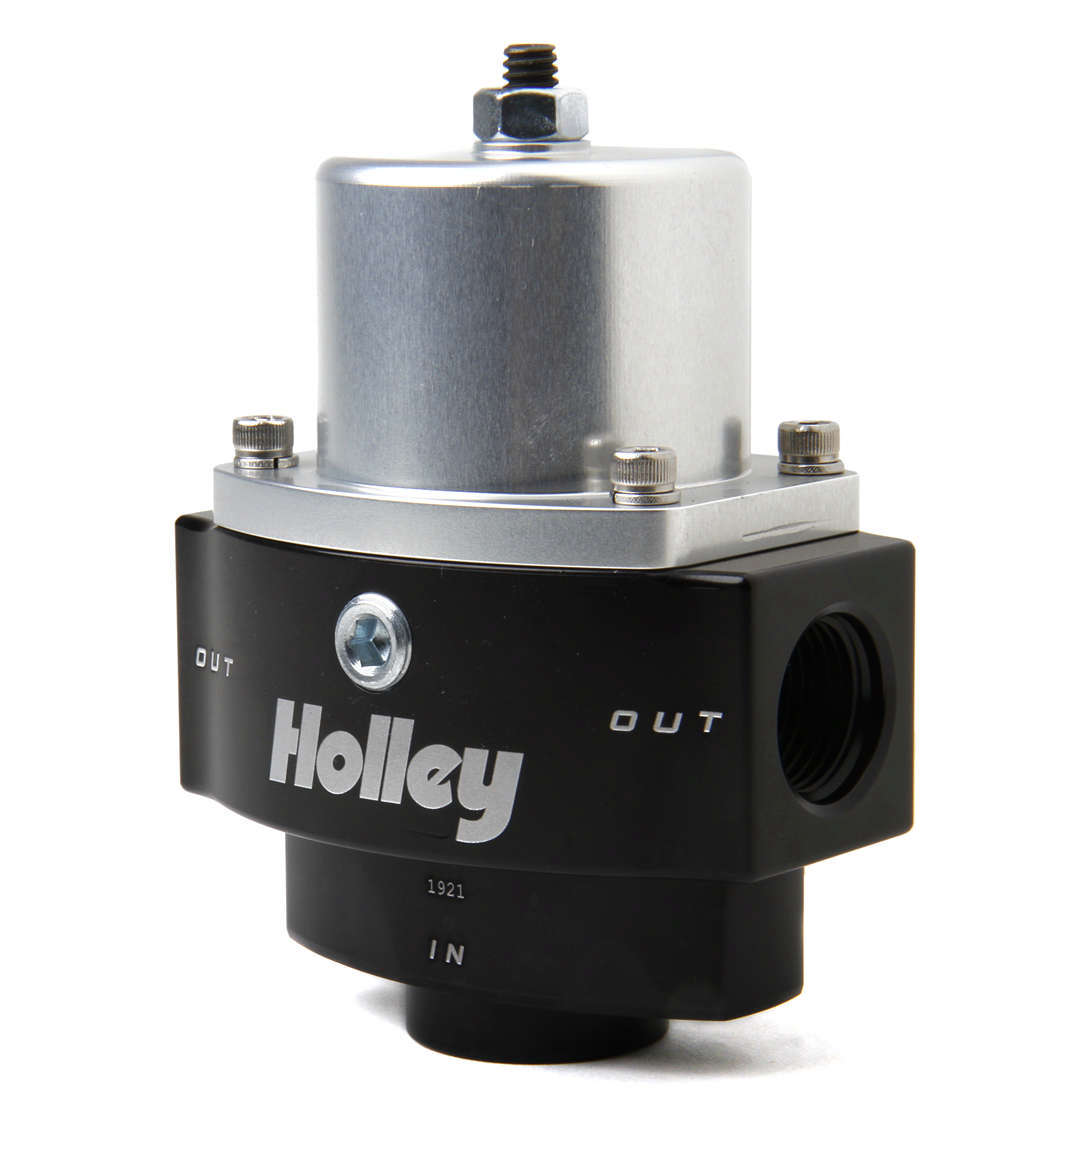 Holley 12-843 Fuel Pressure Regulator, HP Billet, 4.5 to 9 psi, In-Line, 10 AN O-Ring Inlet, Dual 8 AN O-Ring Outlets, Aluminum, Black Anodized, Gas, Each